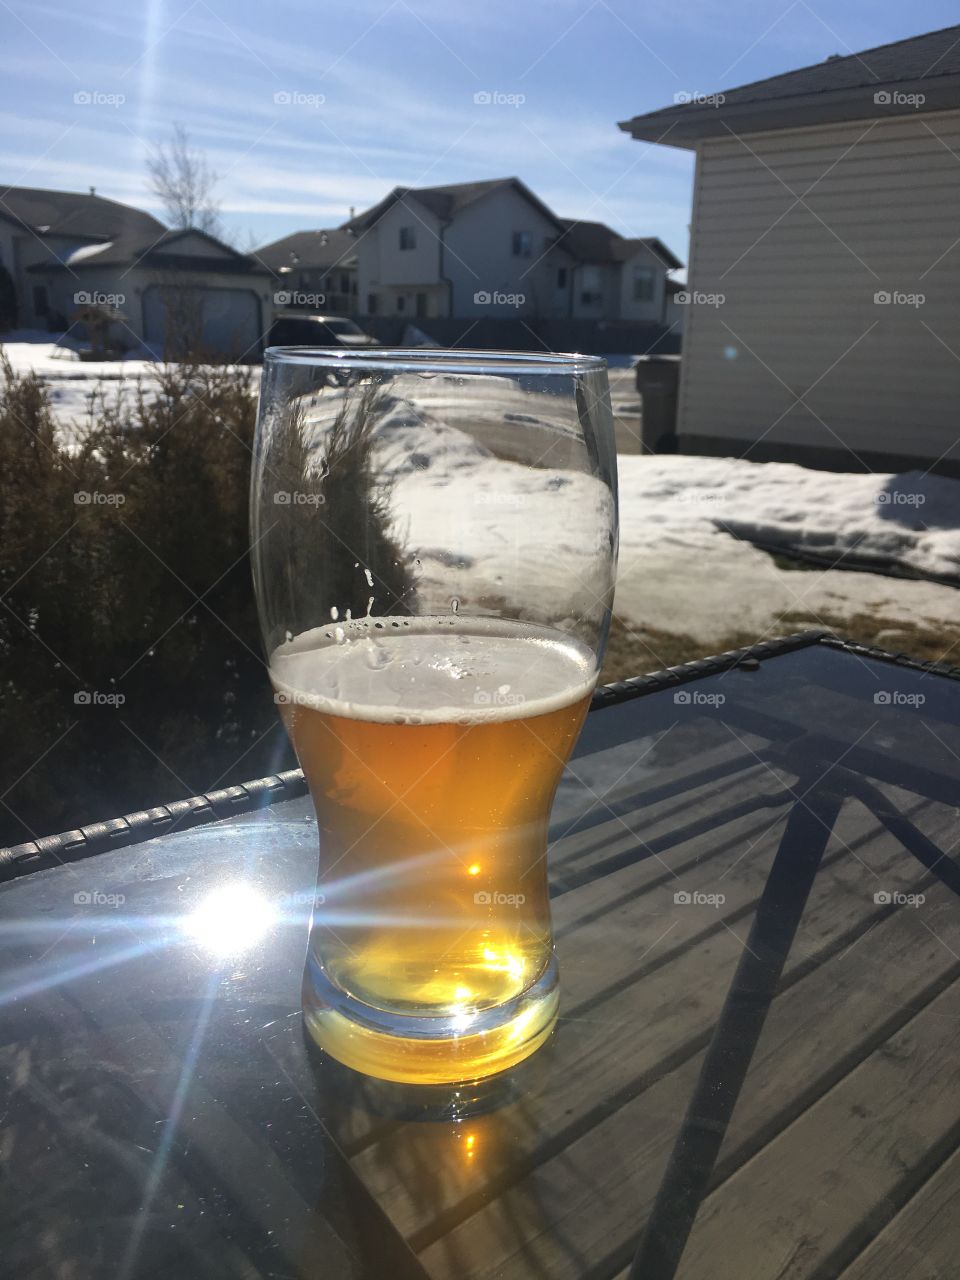 Beer on the deck in the sunshine 